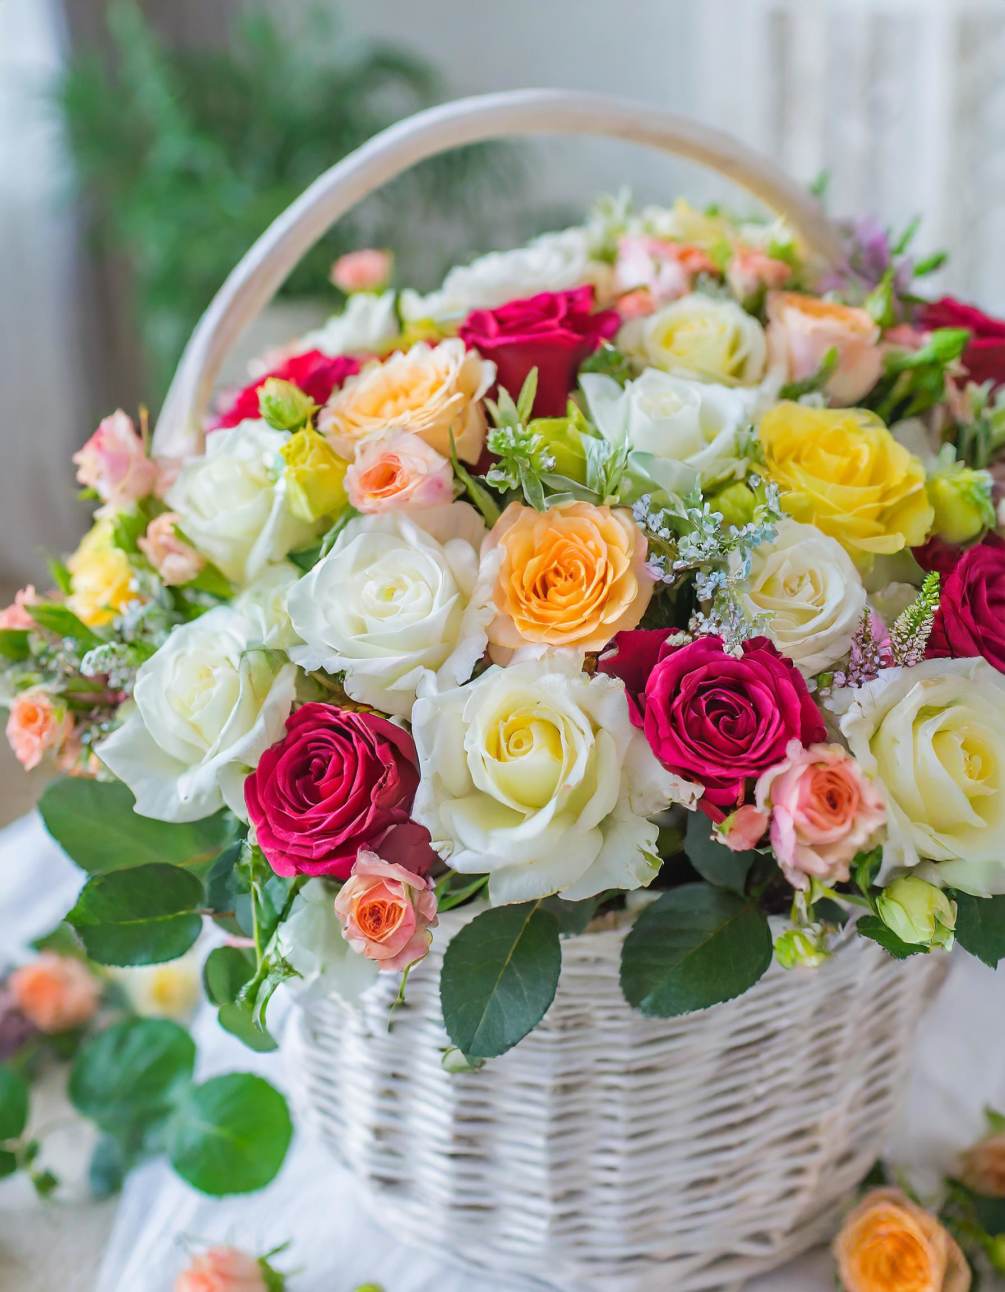 The lovely spring color scheme, displayed in a basket of flowers, radiates